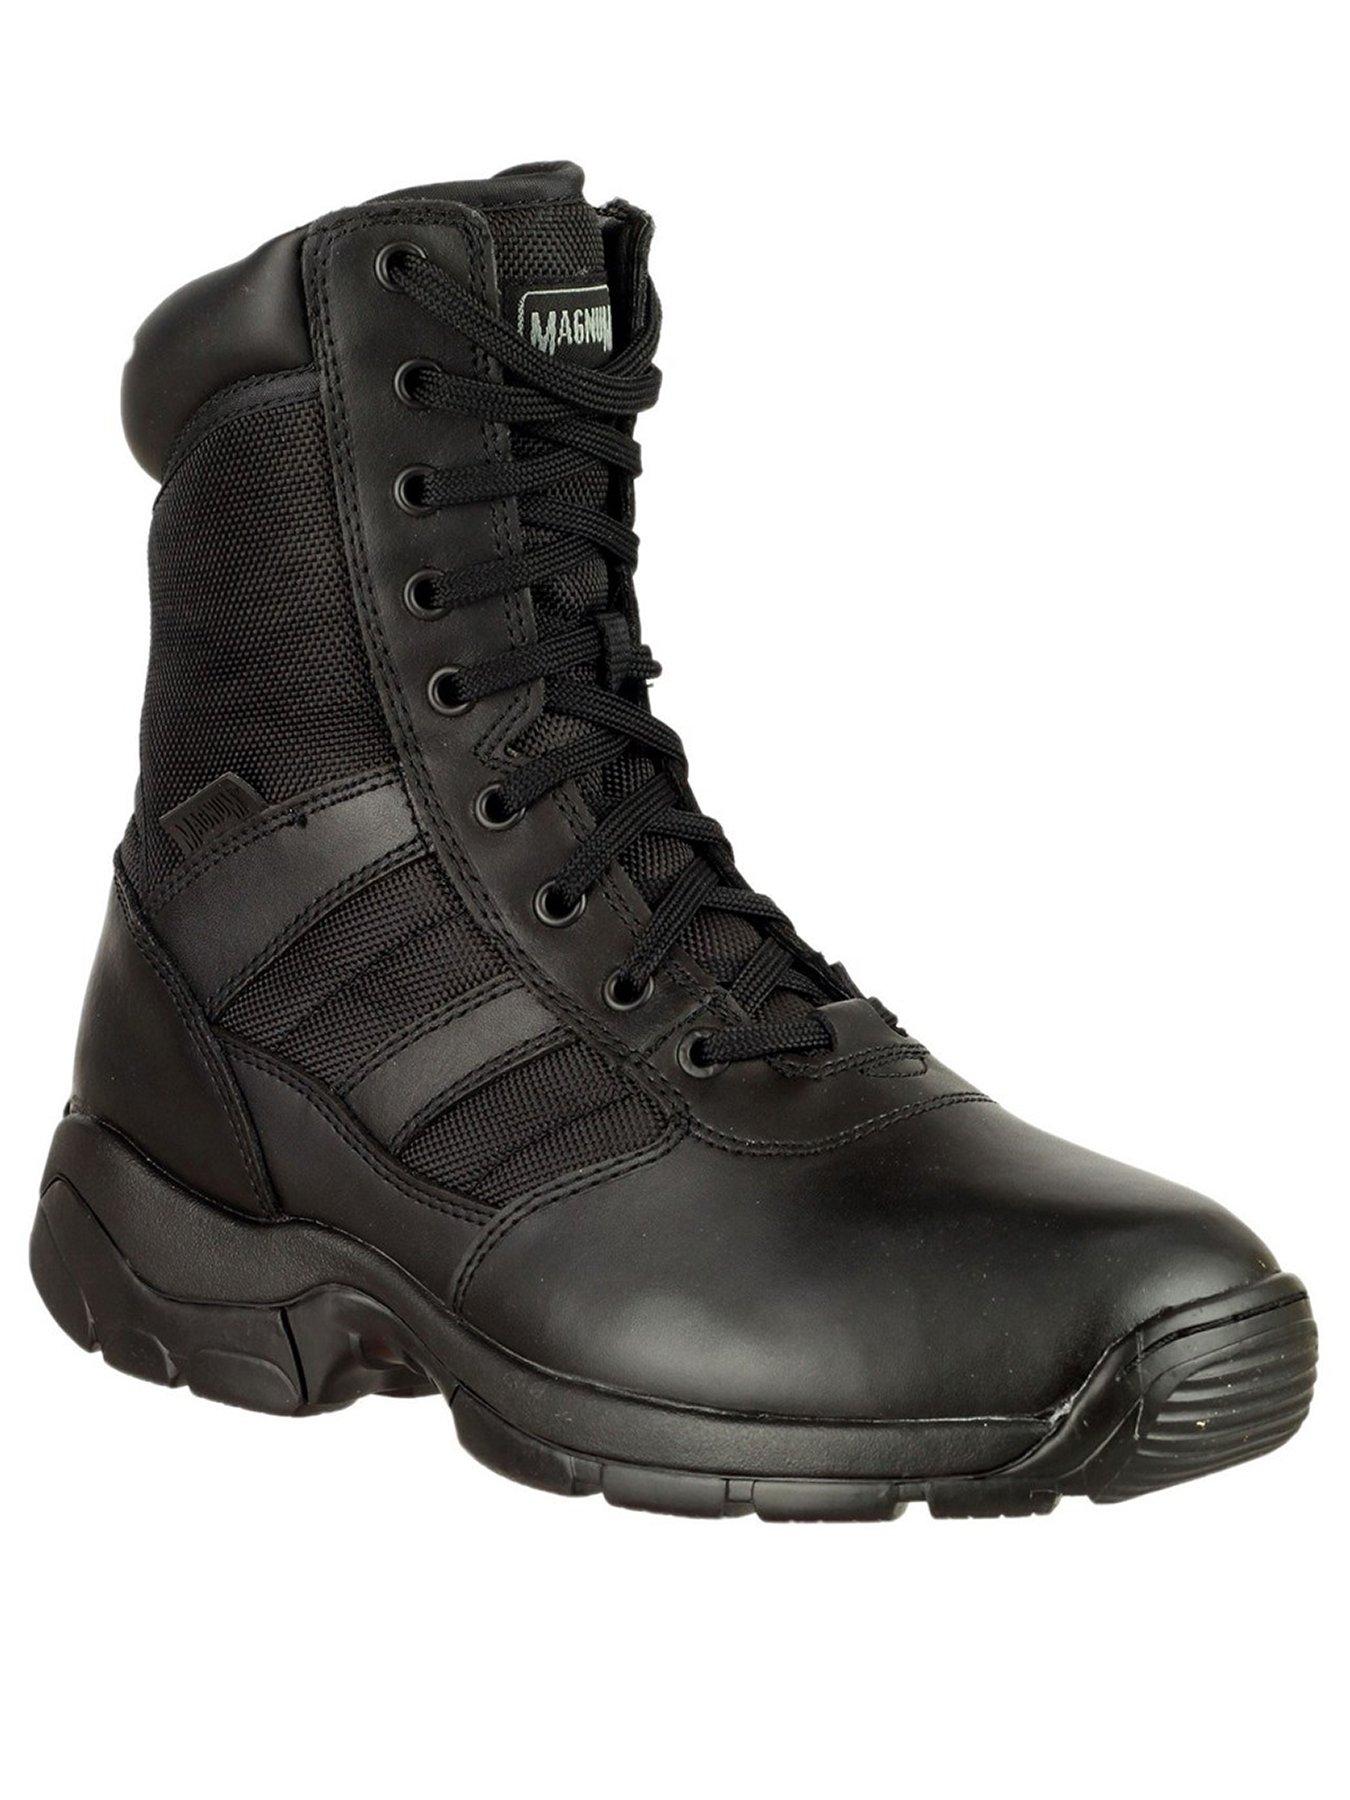 Men Panther 8 Inch Safety Boots